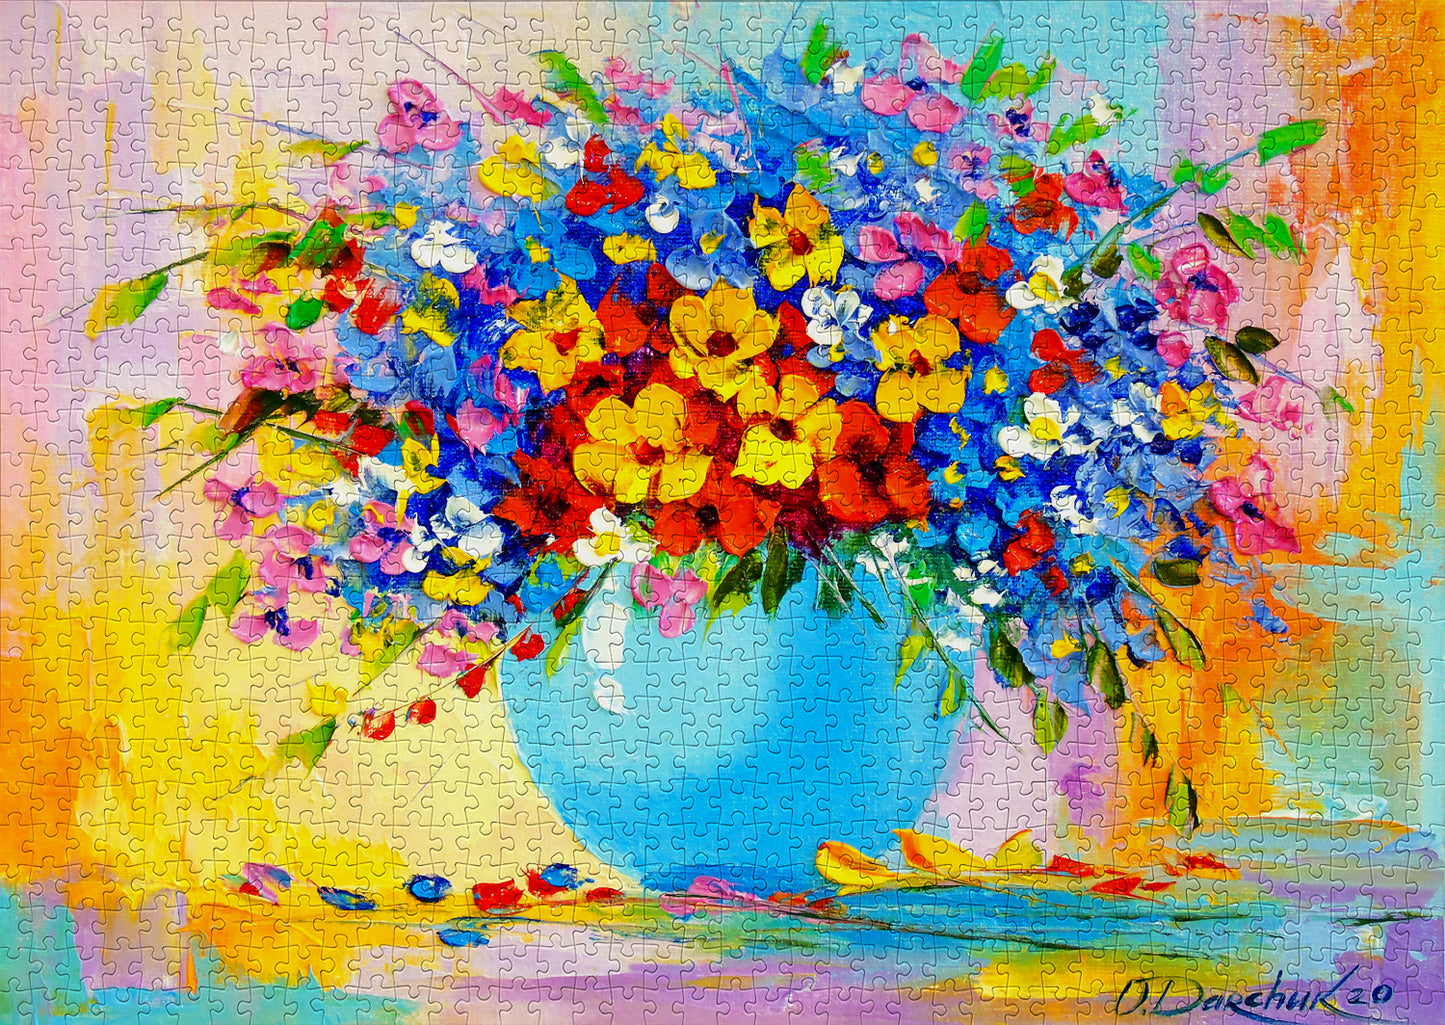 1000 Pieces Jigsaw Puzzle - A Bouquet of Flowers (1756)